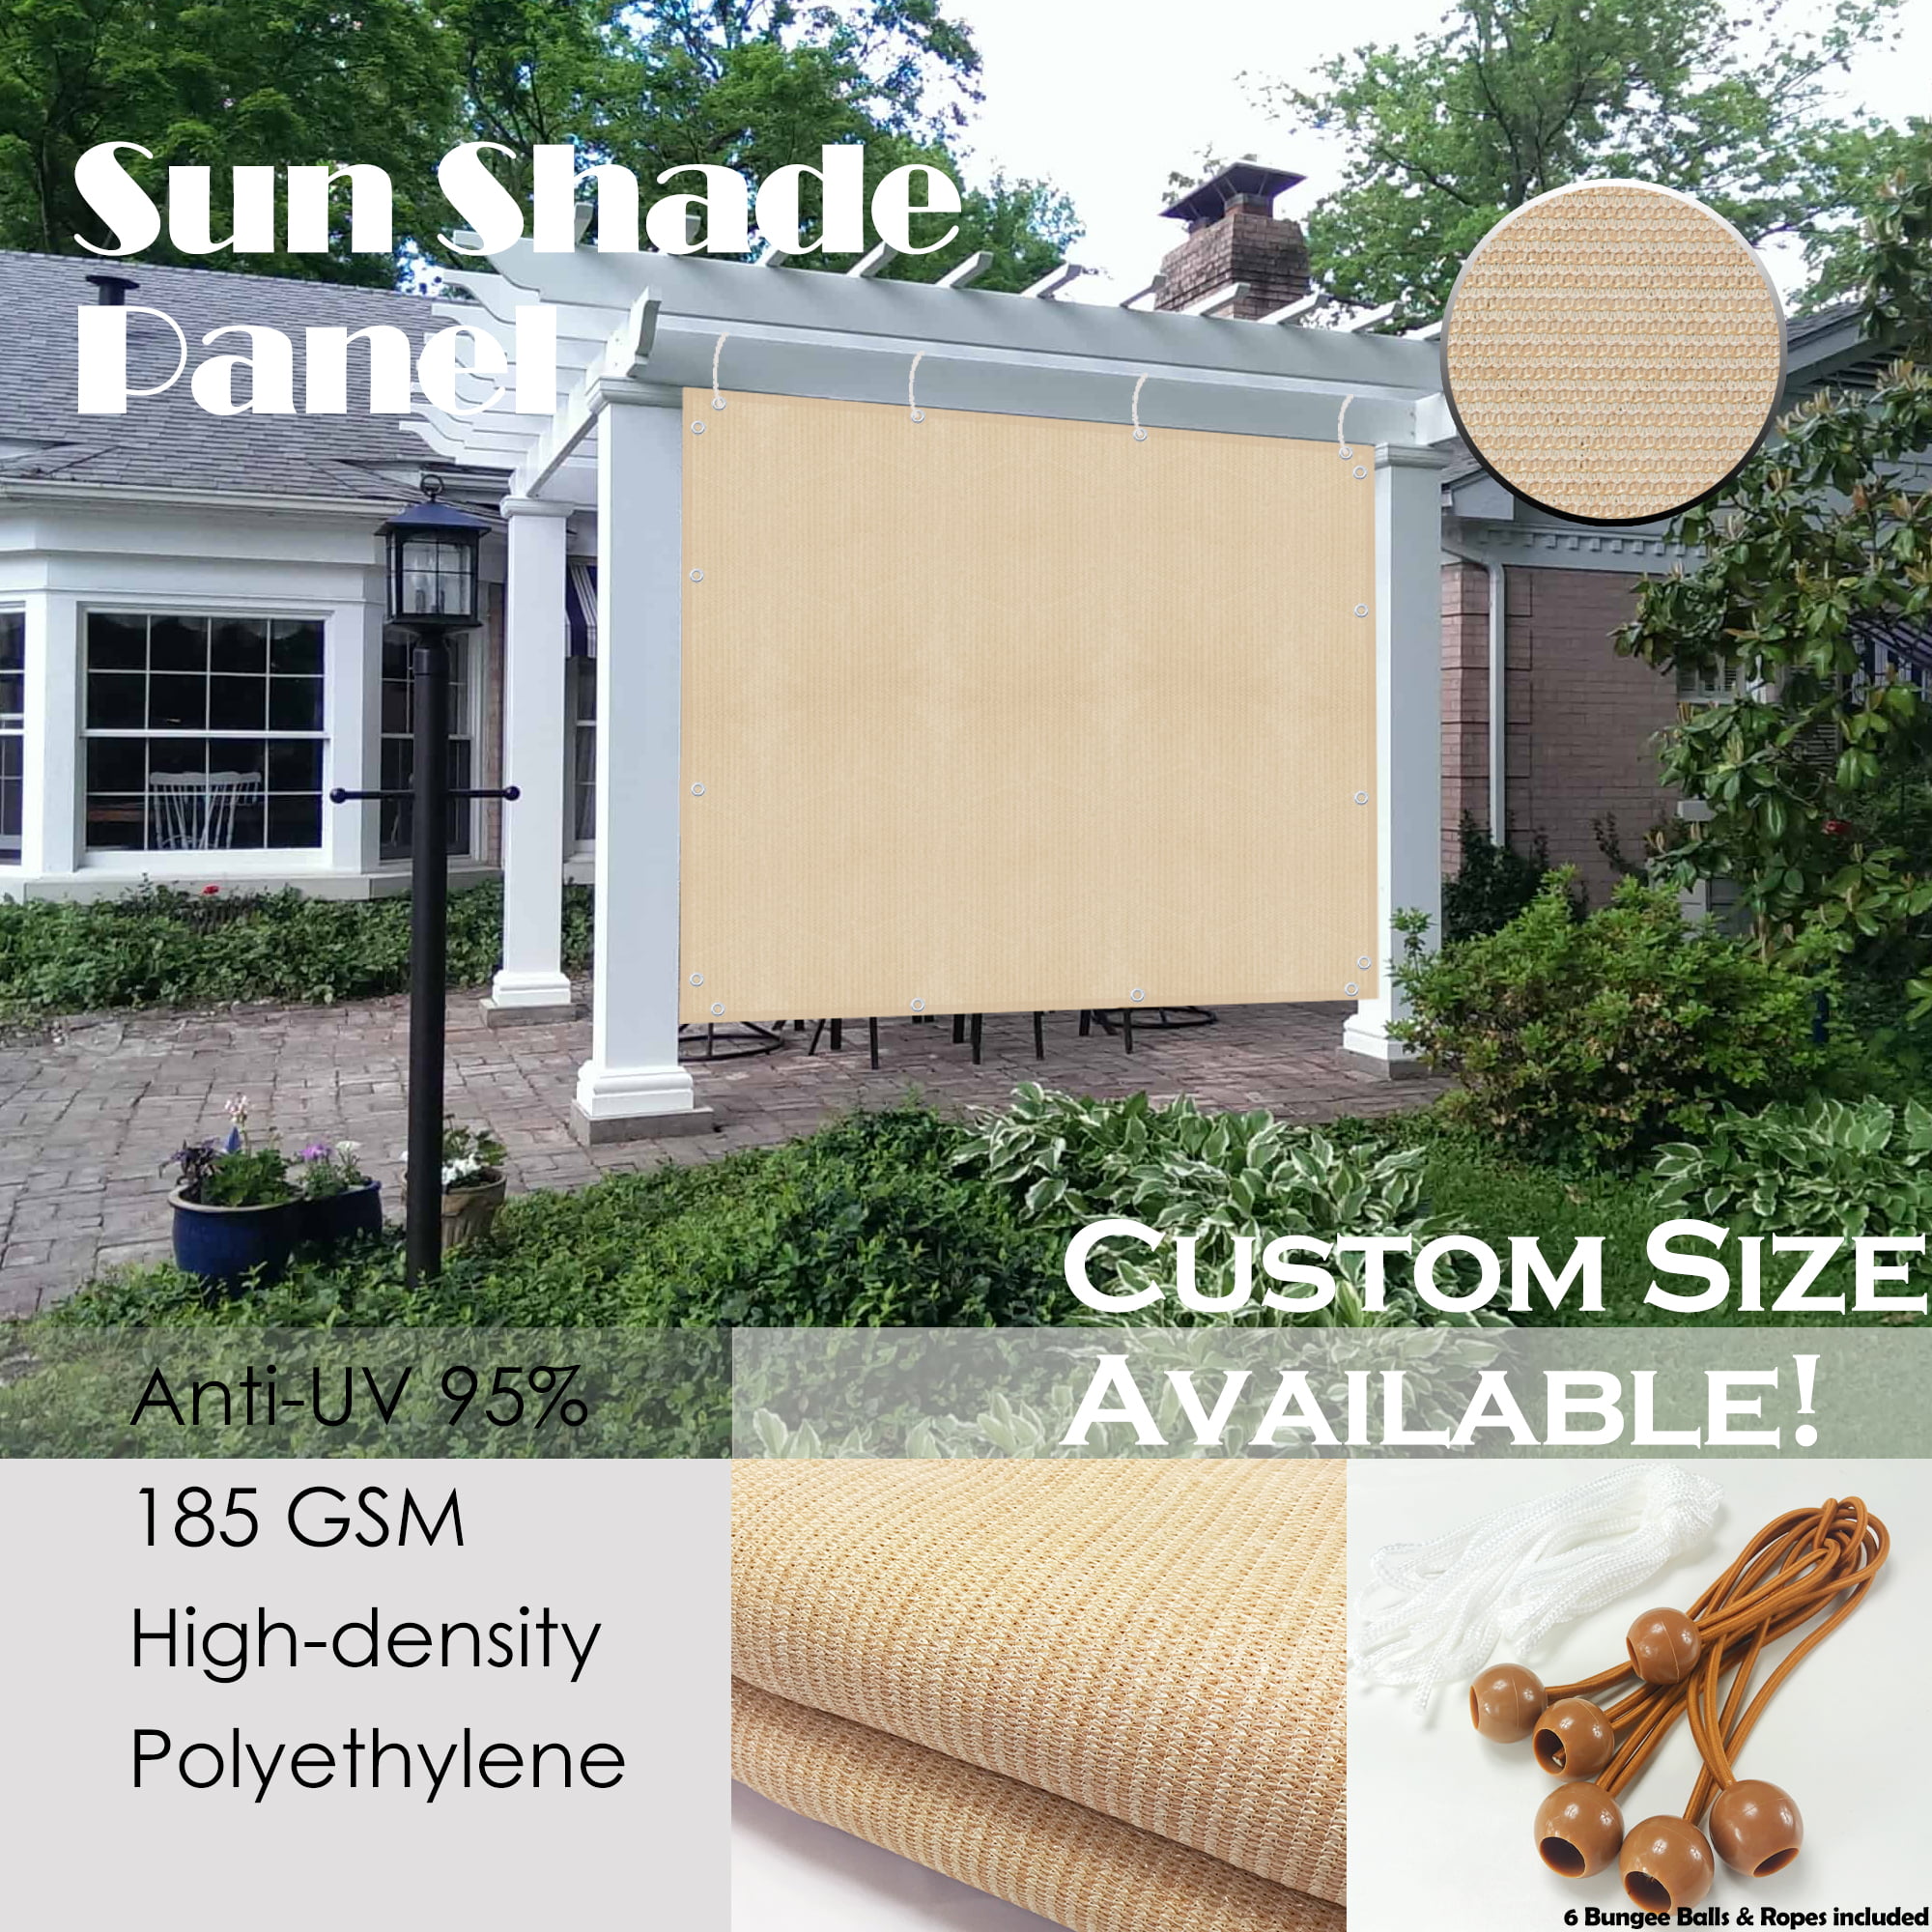 Windscreen4less 12’ x 12’ Universal Replacement Shade Cover Canopy for Pergola Patio Porch Privacy Shade Screen Panel with Grommets on 2 Sides Includes Weighted Rods Breathable UV Block Beige Tan 